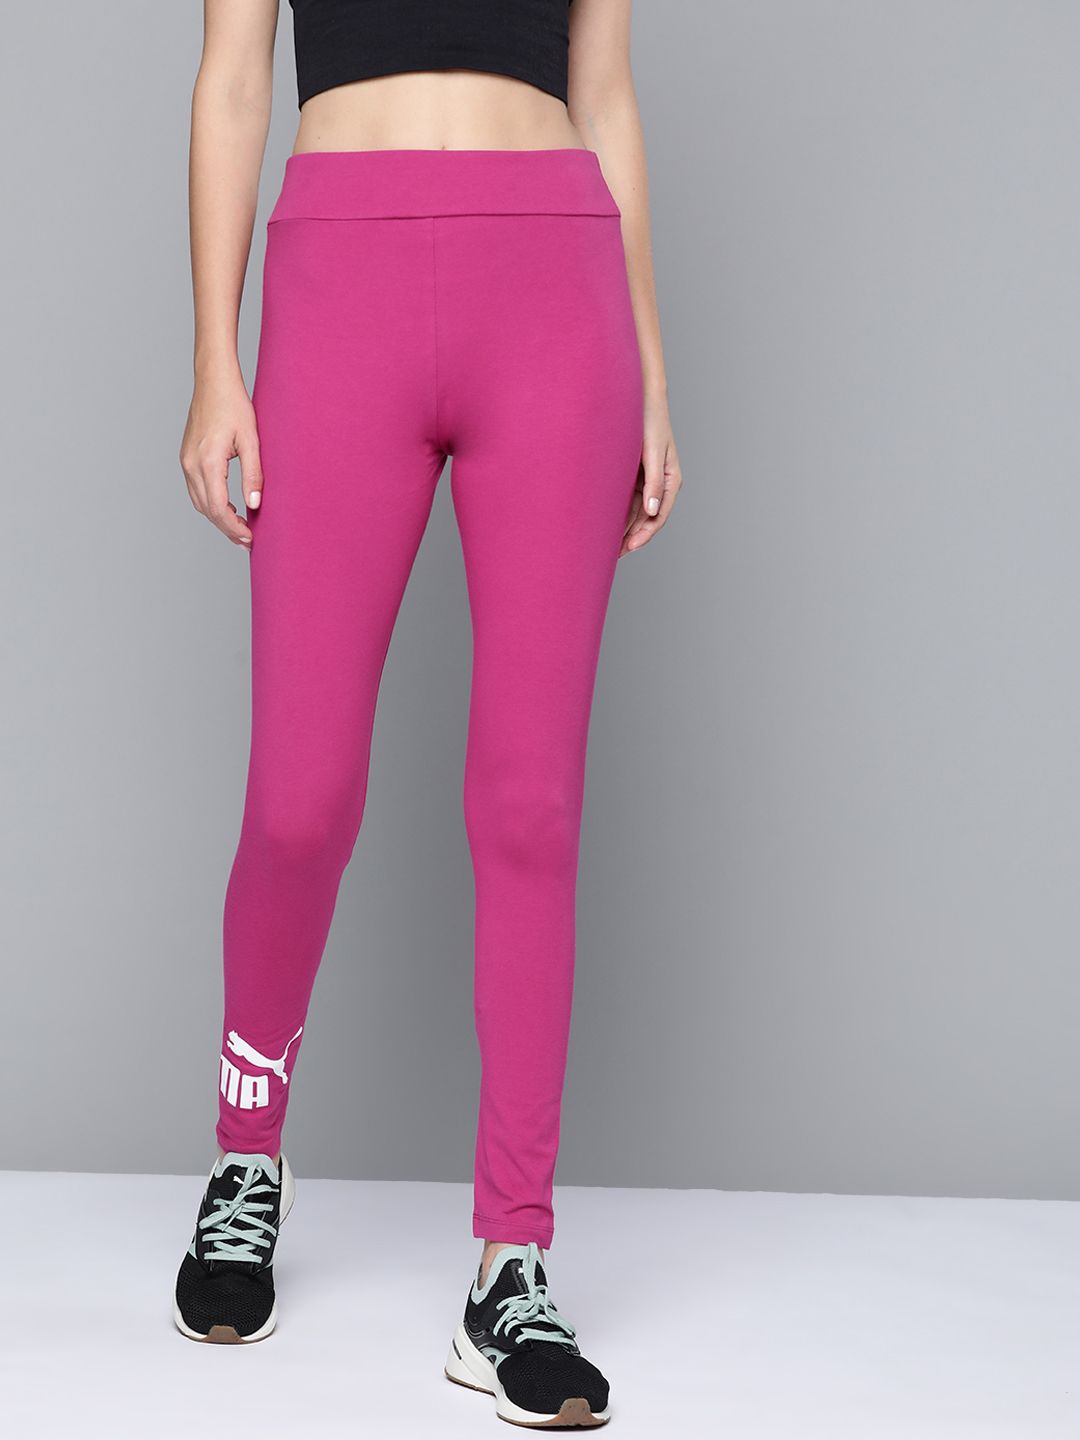 Puma Women's Fuchsia Brand Logo Printed High Rise Tight Fit Training Tights  Price in India, Full Specifications & Offers